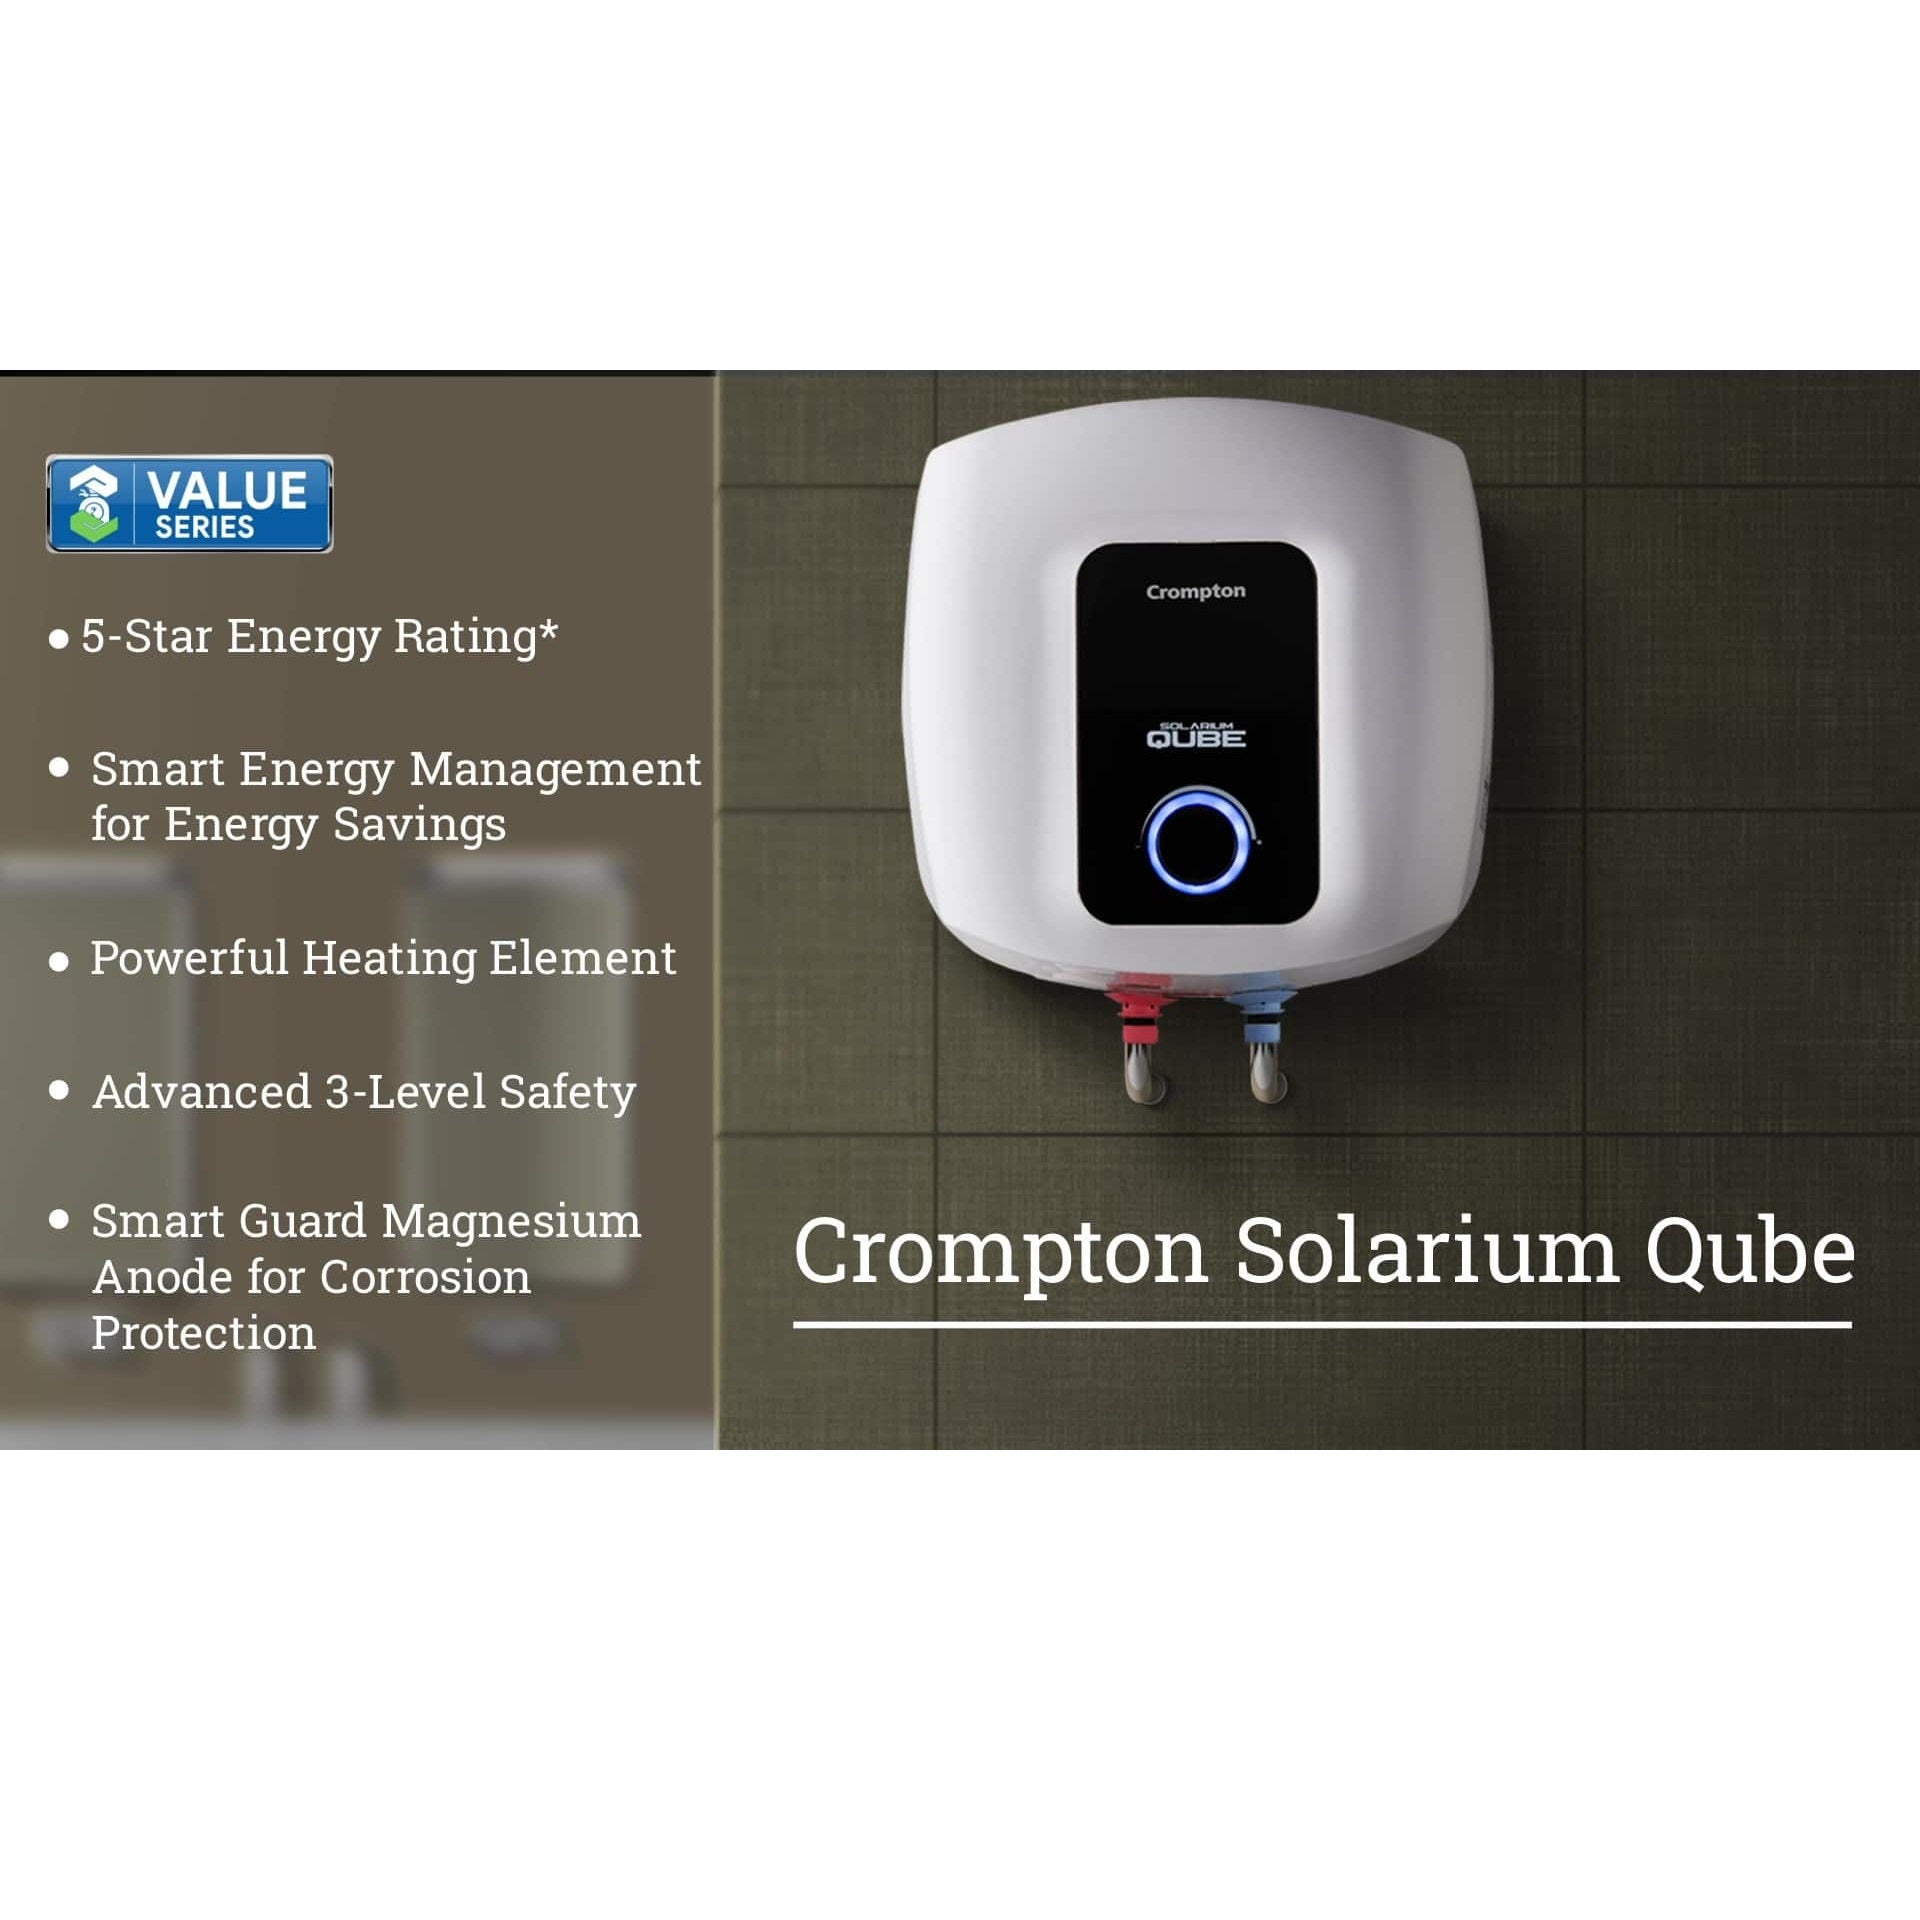 Crompton Storage Water Heater 10L Capacity 5 Star Rated with Powerful Heating Element Solarium Qube